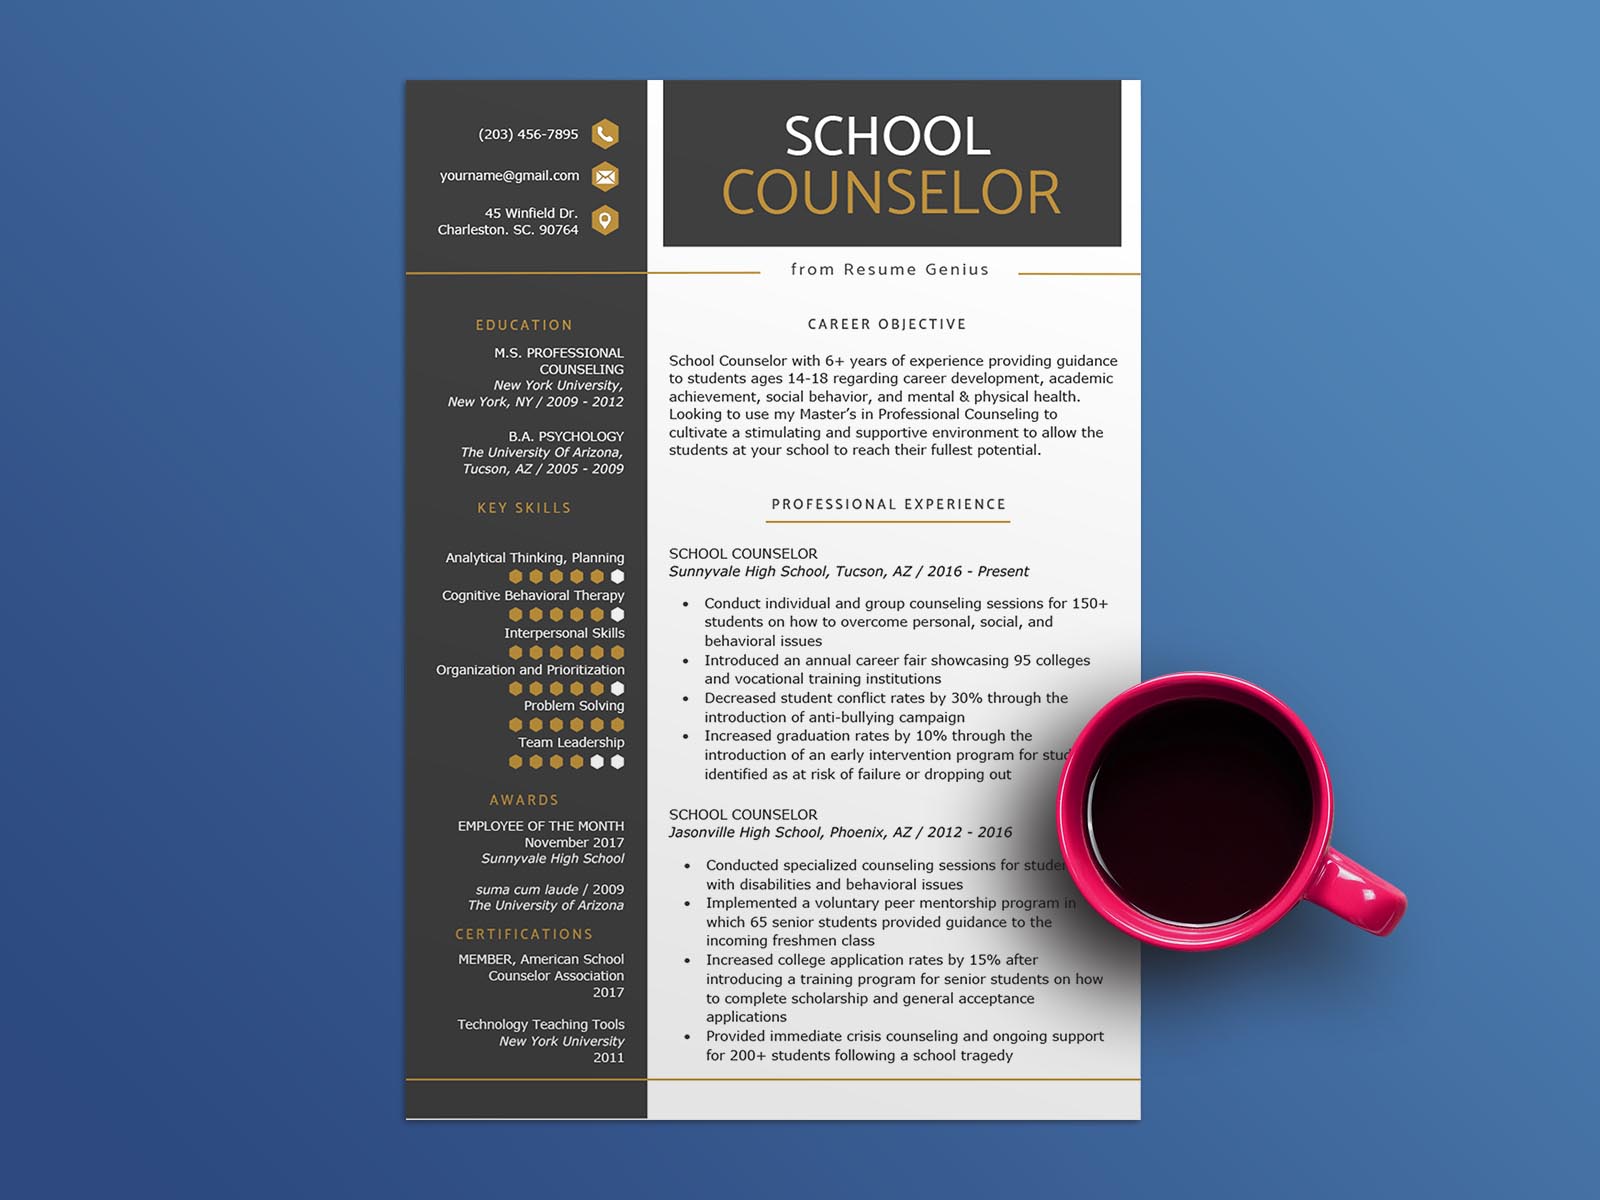 Free School Counselor CV Resume Template with Clean and Minimalist Design